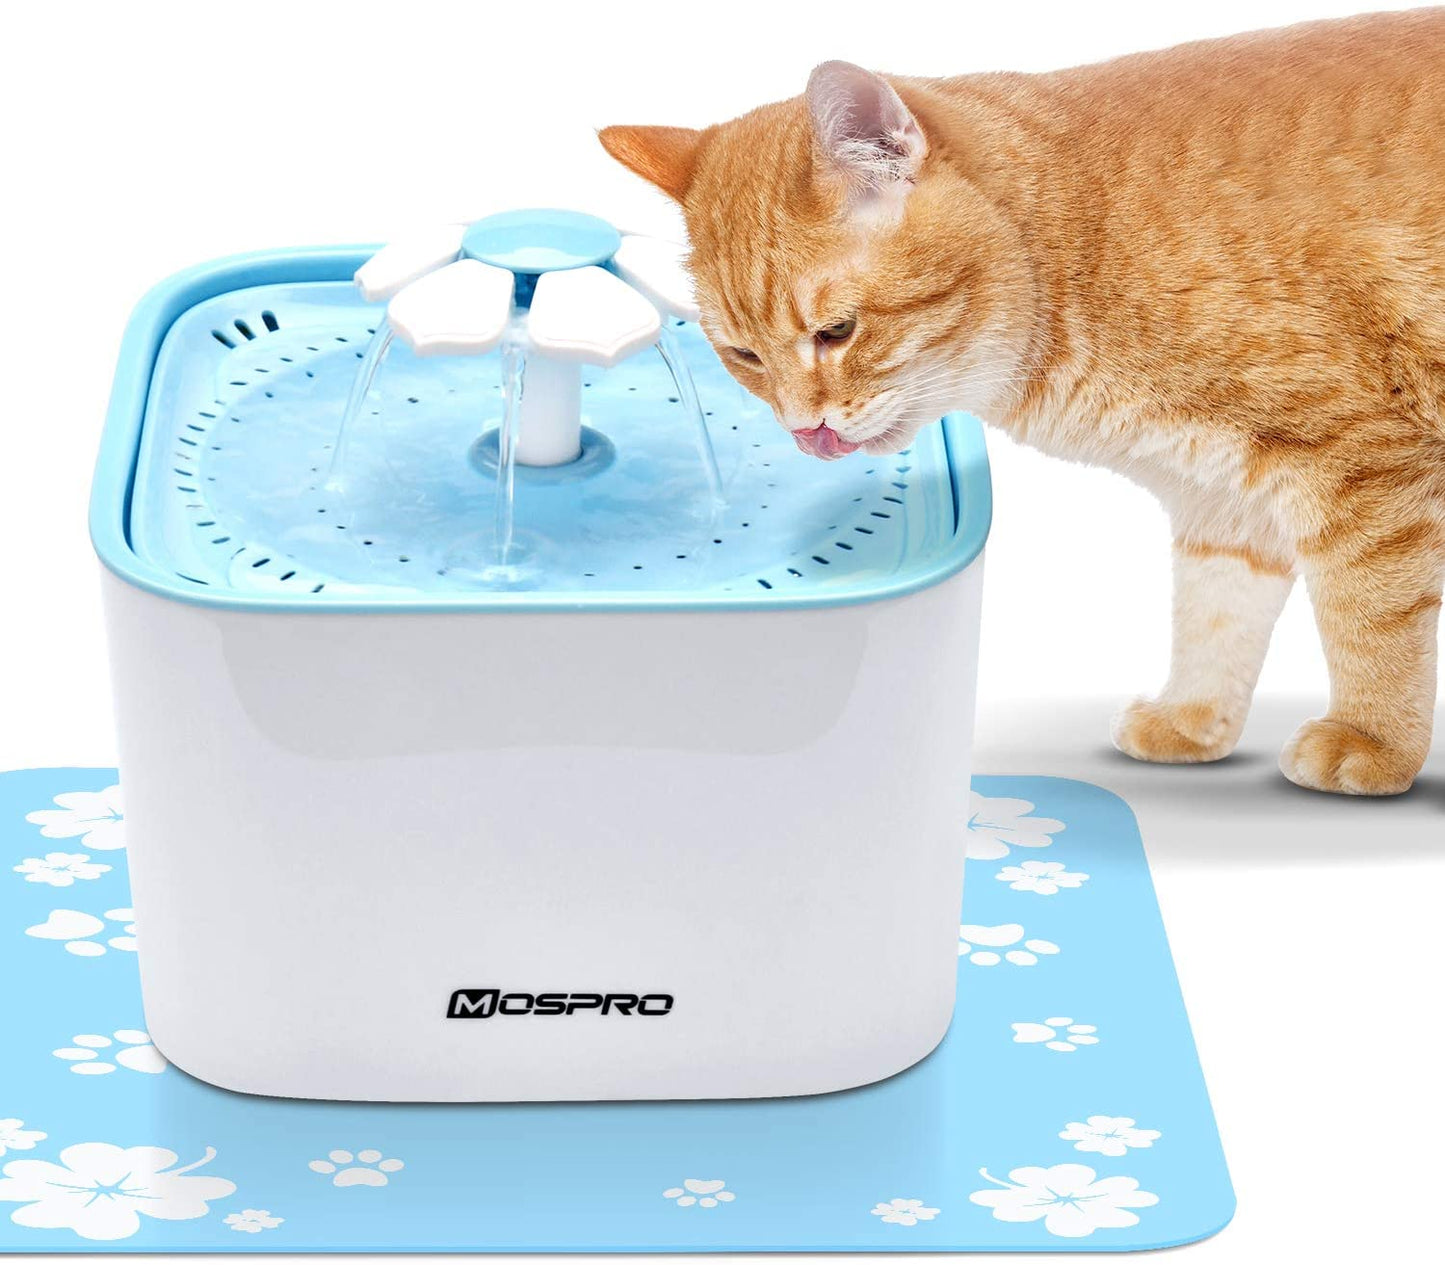 Pet Fountain Cat Water Dispenser - Healthy and Hygienic Drinking Fountain Super Quiet Flower Automatic Electric Water Bowl with 2 Replacement Filters for Dogs, Cats, Birds and Small Animals Blue